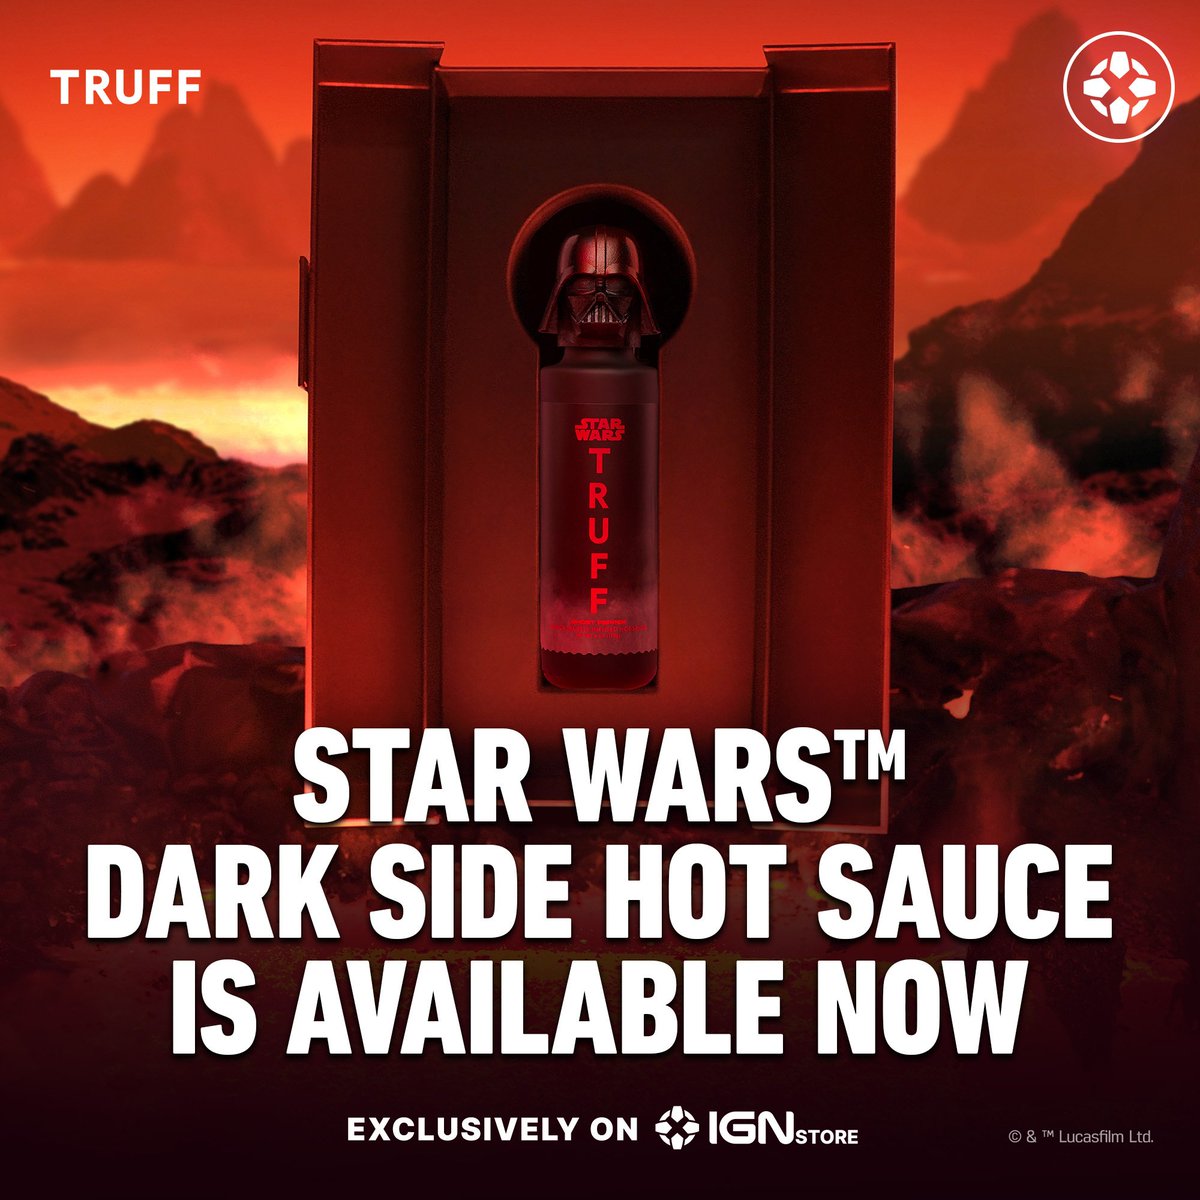 STAR WARS™ Dark Side Hot Sauce is a carefully crafted blend inspired by the ominous allure and dark mystique of the @STARWARS galaxy. Order now exclusively on IGN Store! IGN.com/TRUFF?utm_sour…